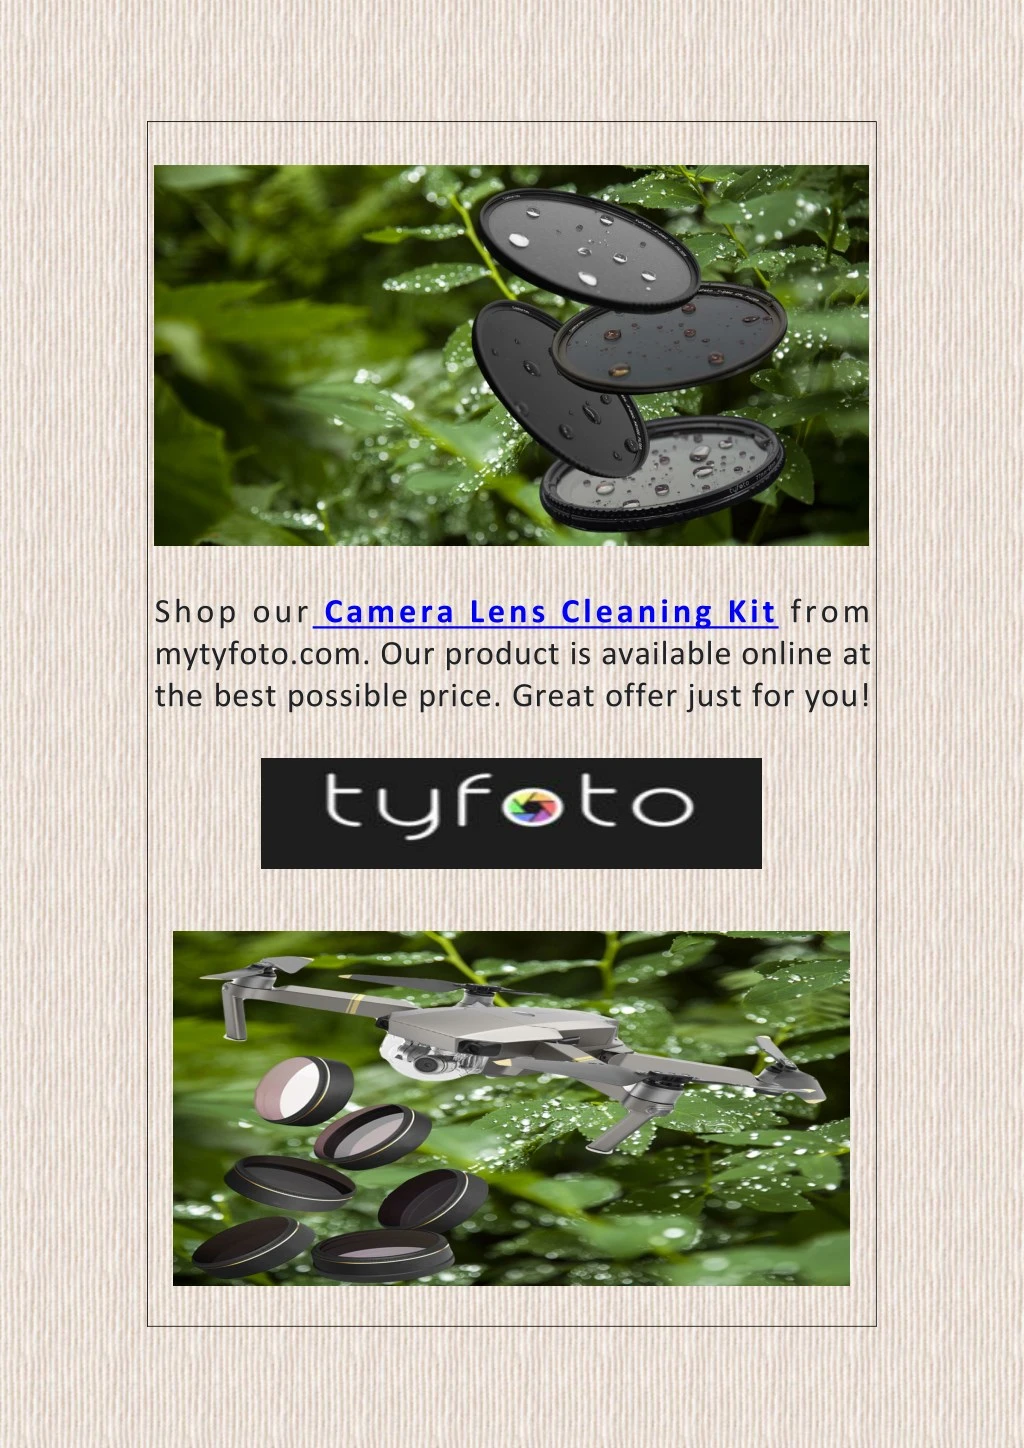 shop our camera lens cleaning kit from mytyfoto